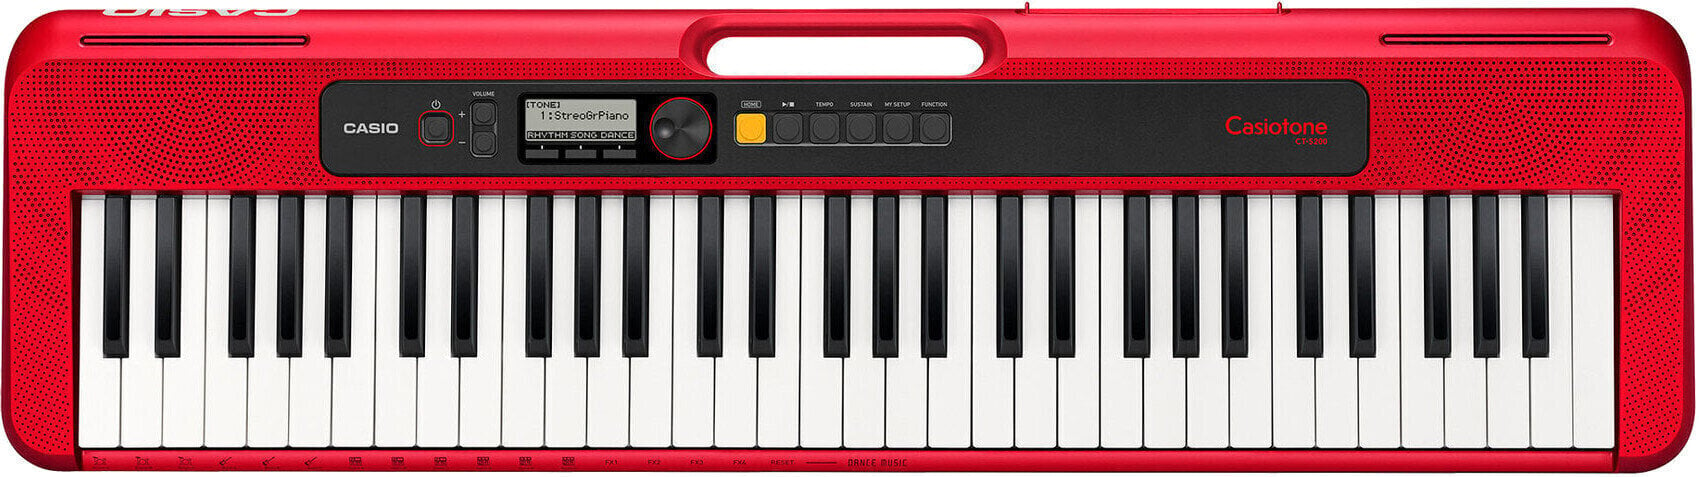 Keyboards ohne Touch Response Casio CT-S200 RD